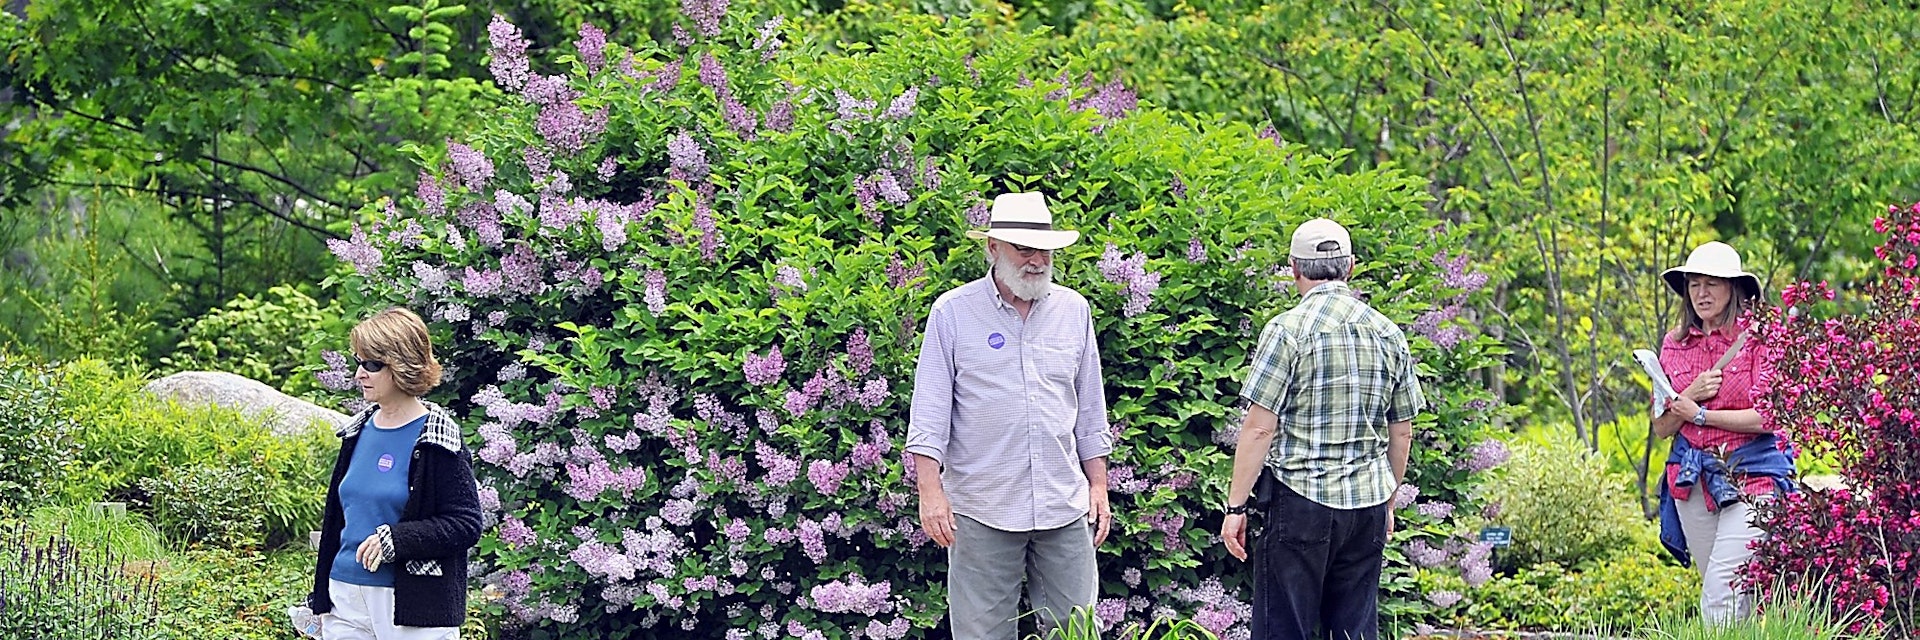 Gordon Chibroski, Staff Photographer. Friday, June 14,  2013. .Visitors to the Coastal Maine Botanical Gardens in Boothbay are surrounded by a multitude of fauna and flora.